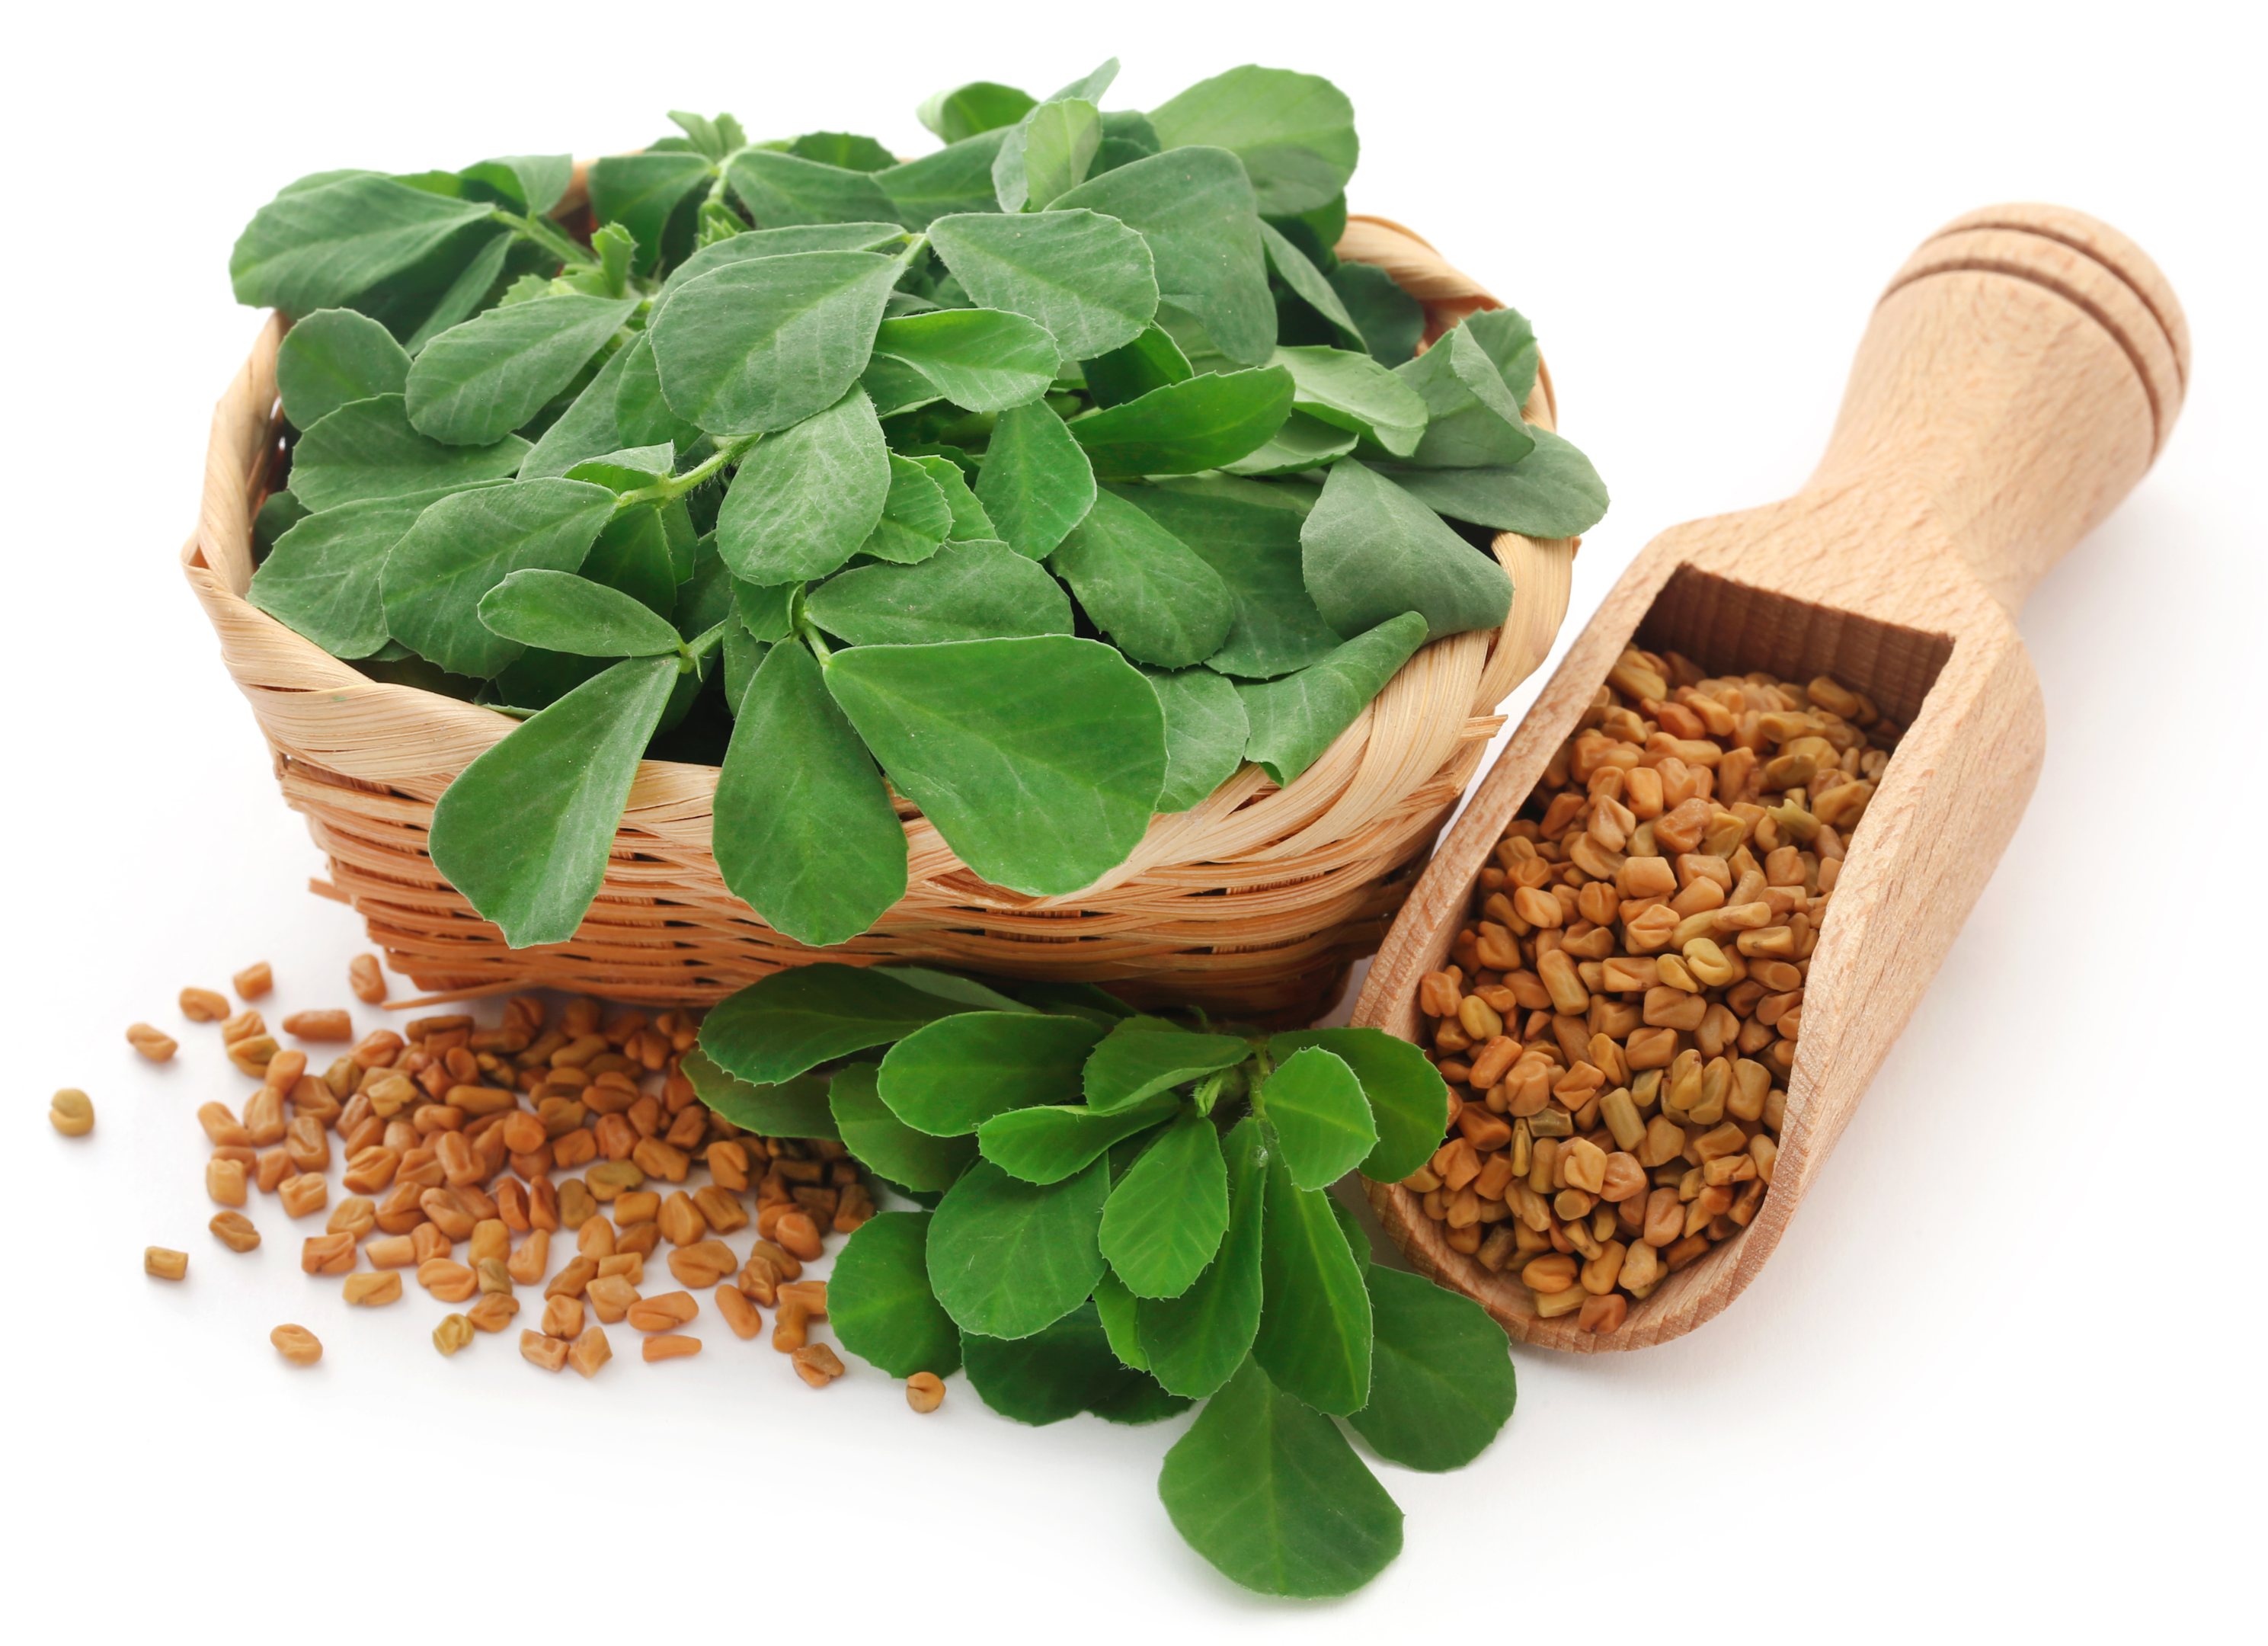 testosterone levels and testosterone production can be affected with fenugreek supplements